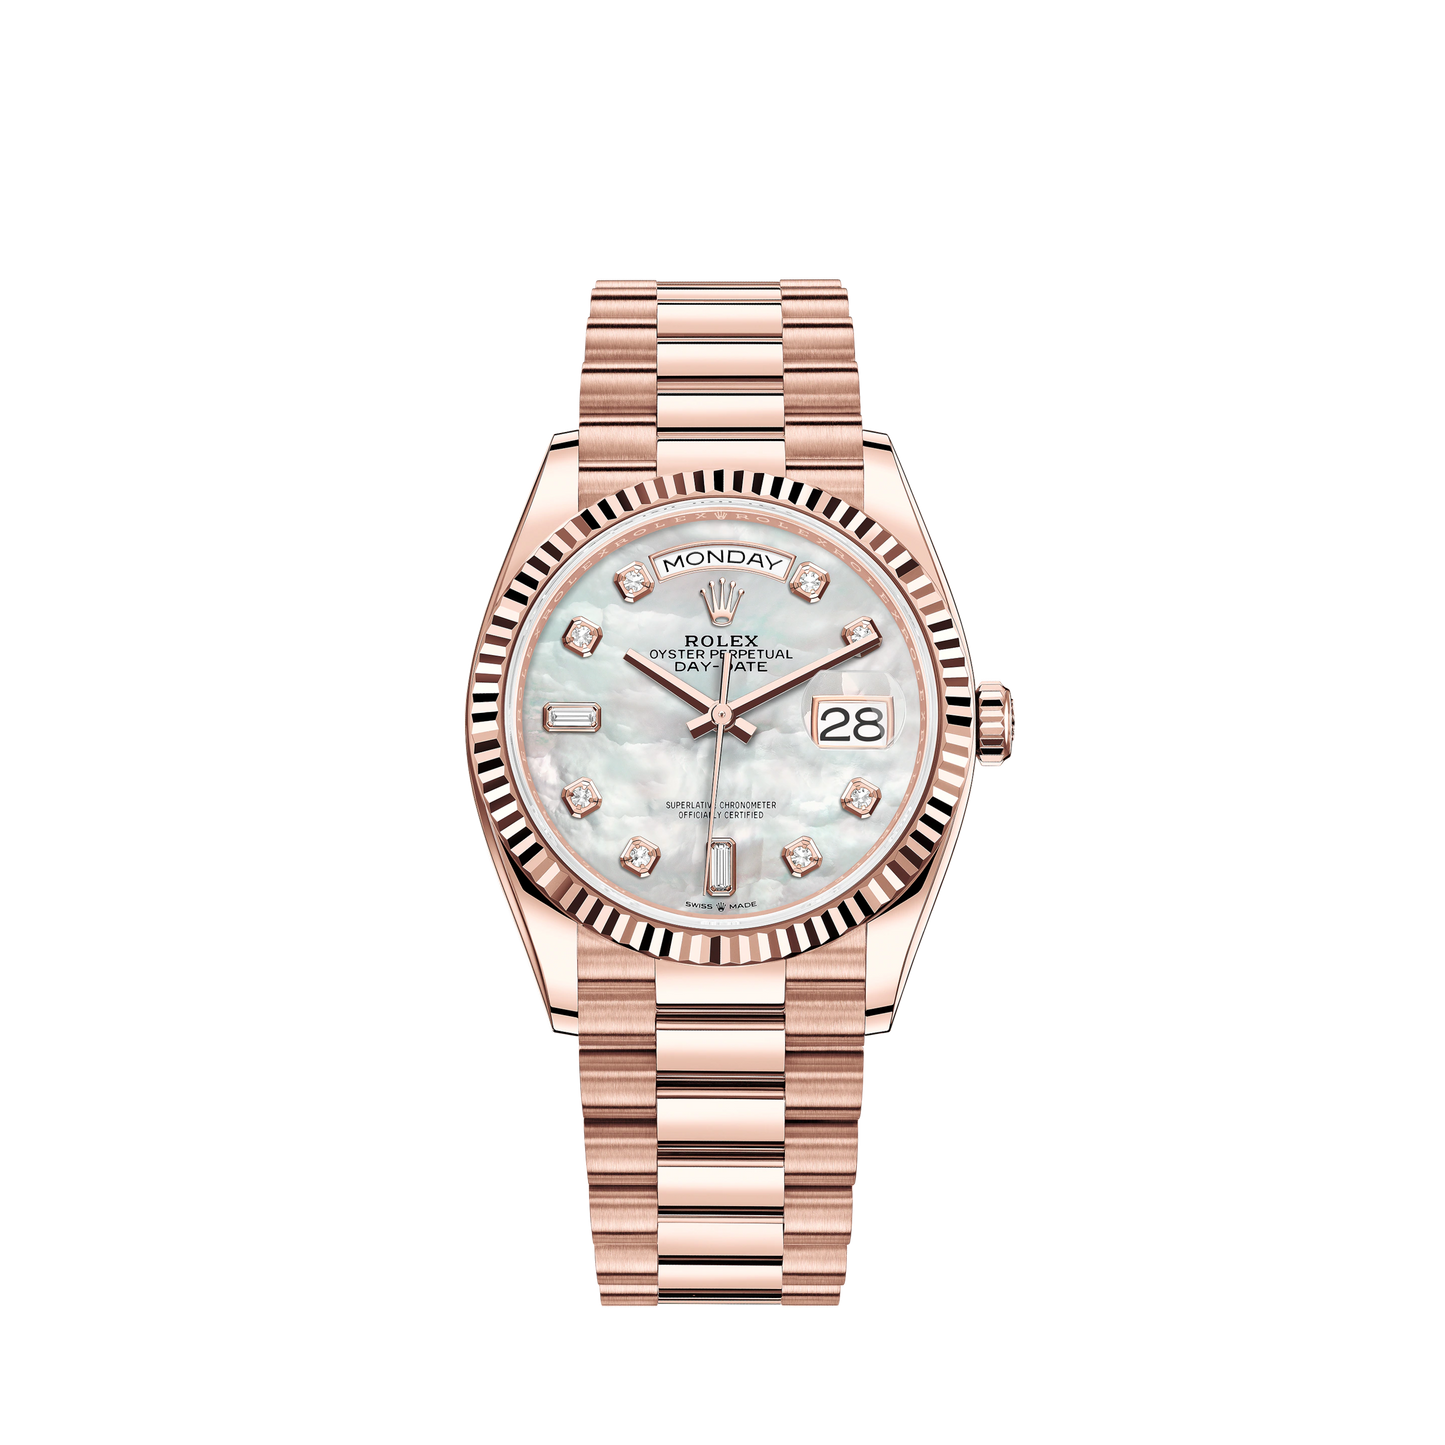 Day-Date 36 36mm President Bracelet and 18 KT Everose Gold with White Mother-of-Pearl Dial Diamond-Set Dial Fluted Bezel